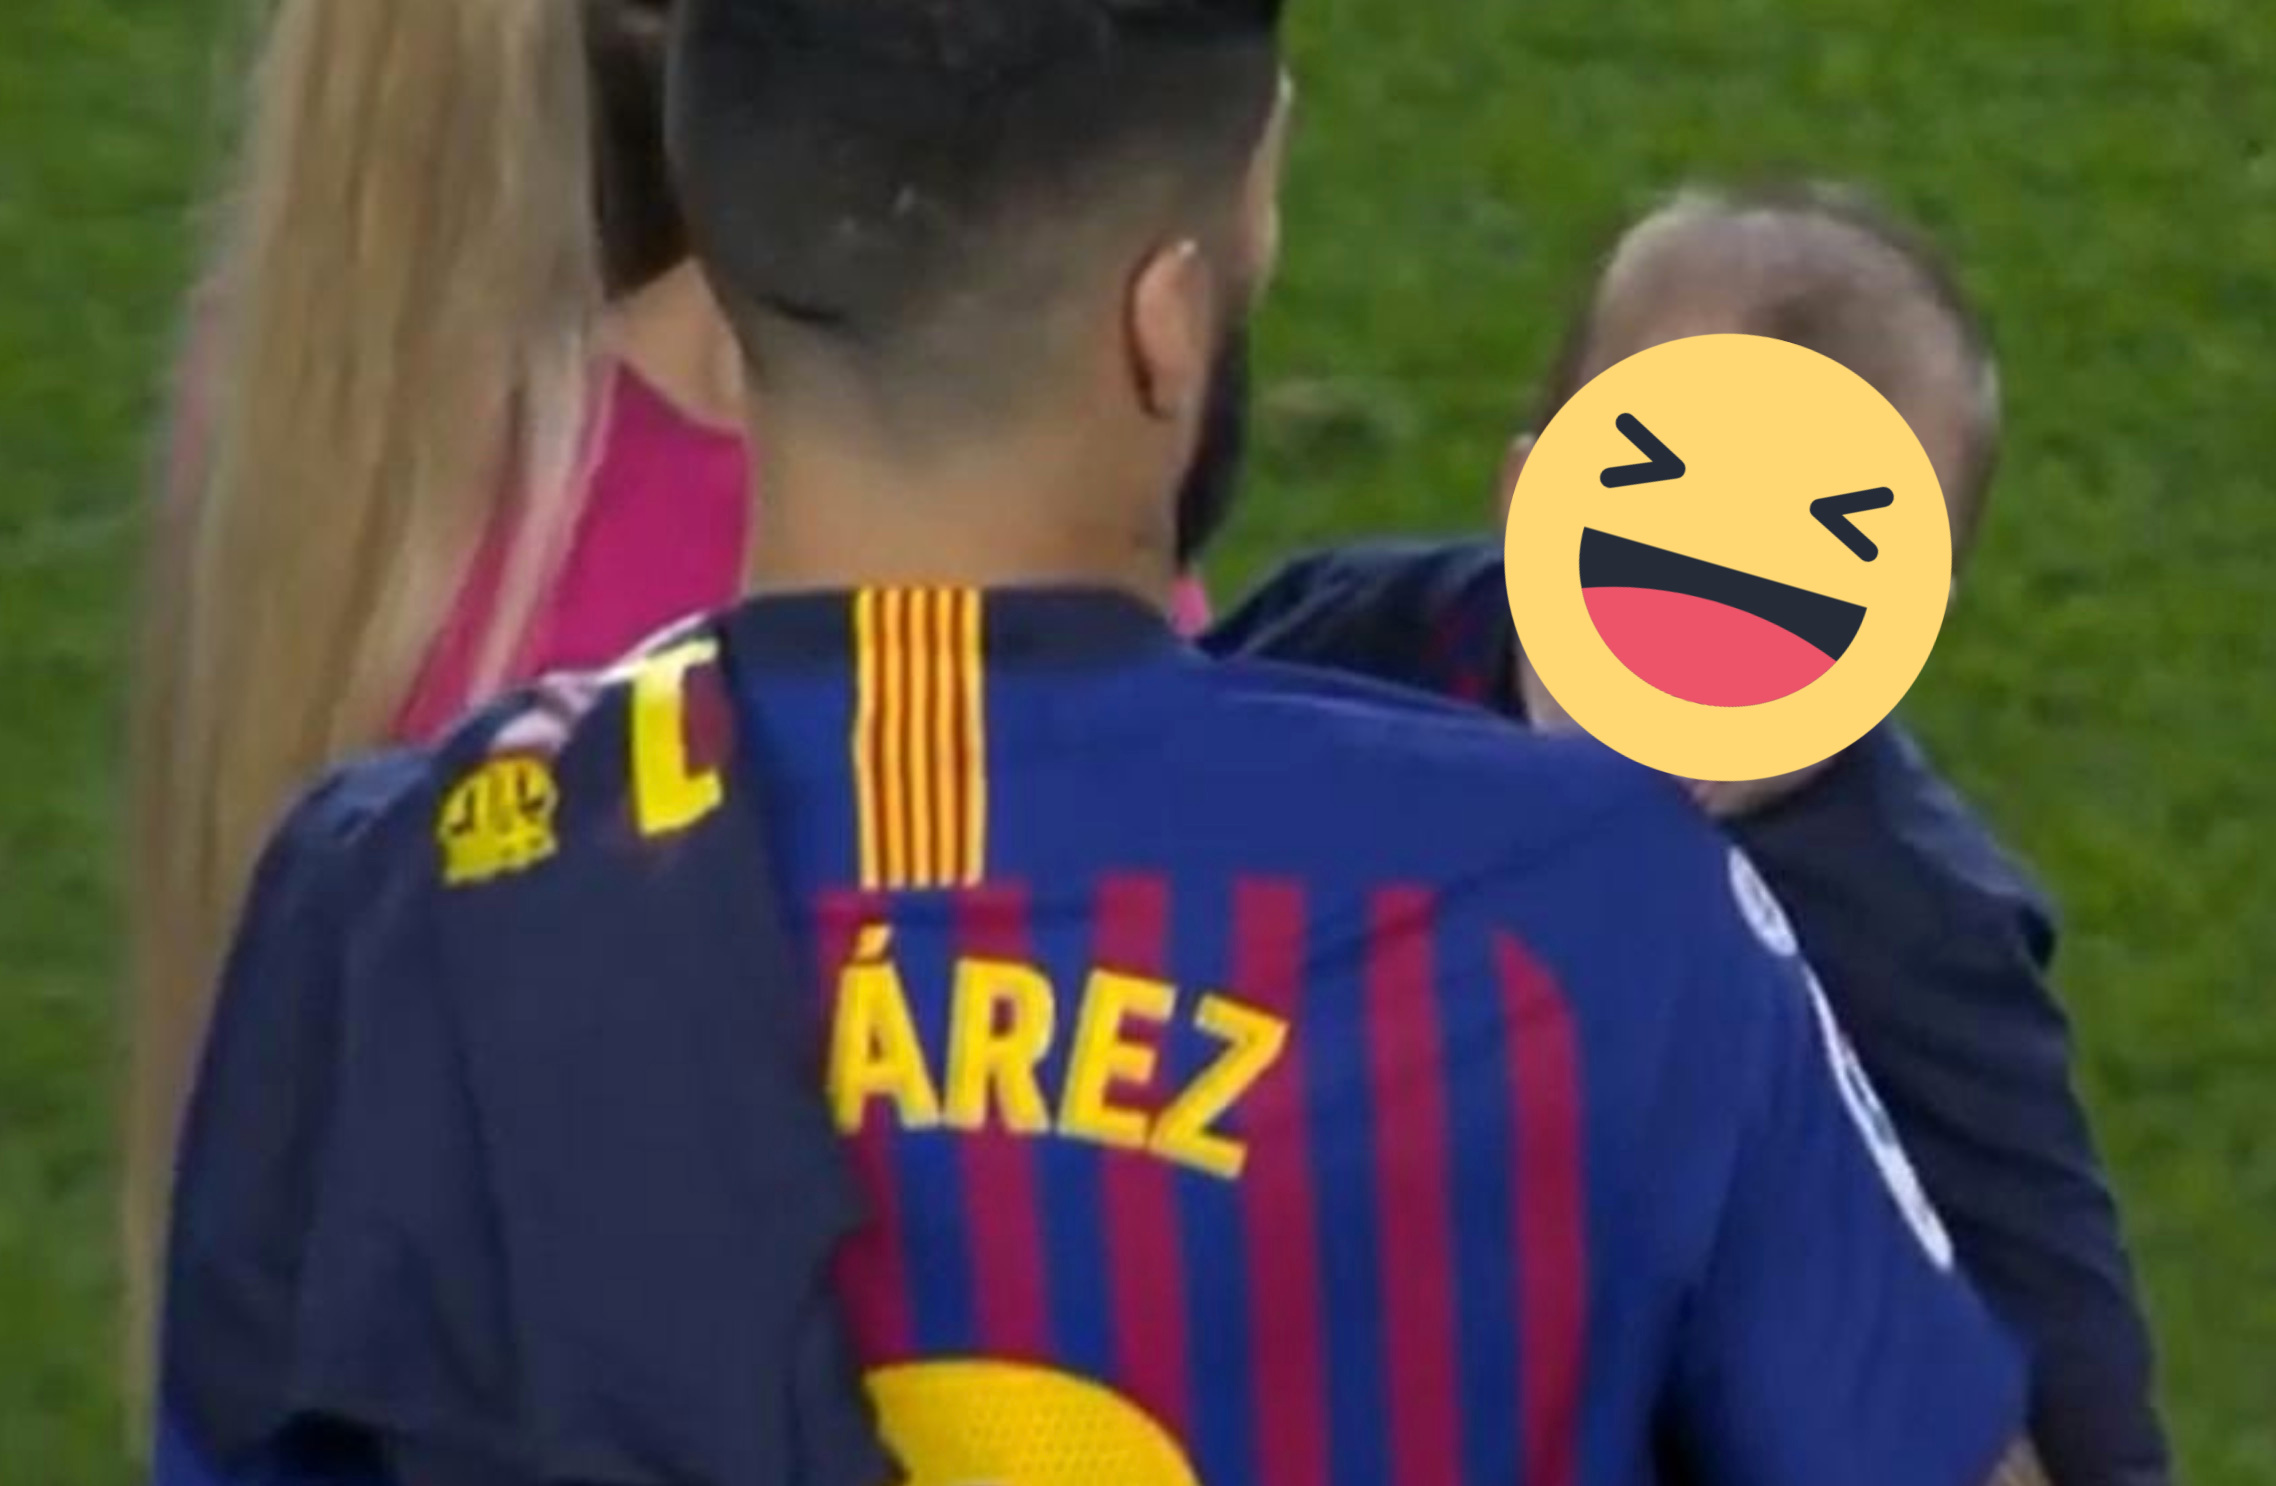 Cute photo of Luis Suarez’s son appearing to bite him during Barcelona celebrations goes viral